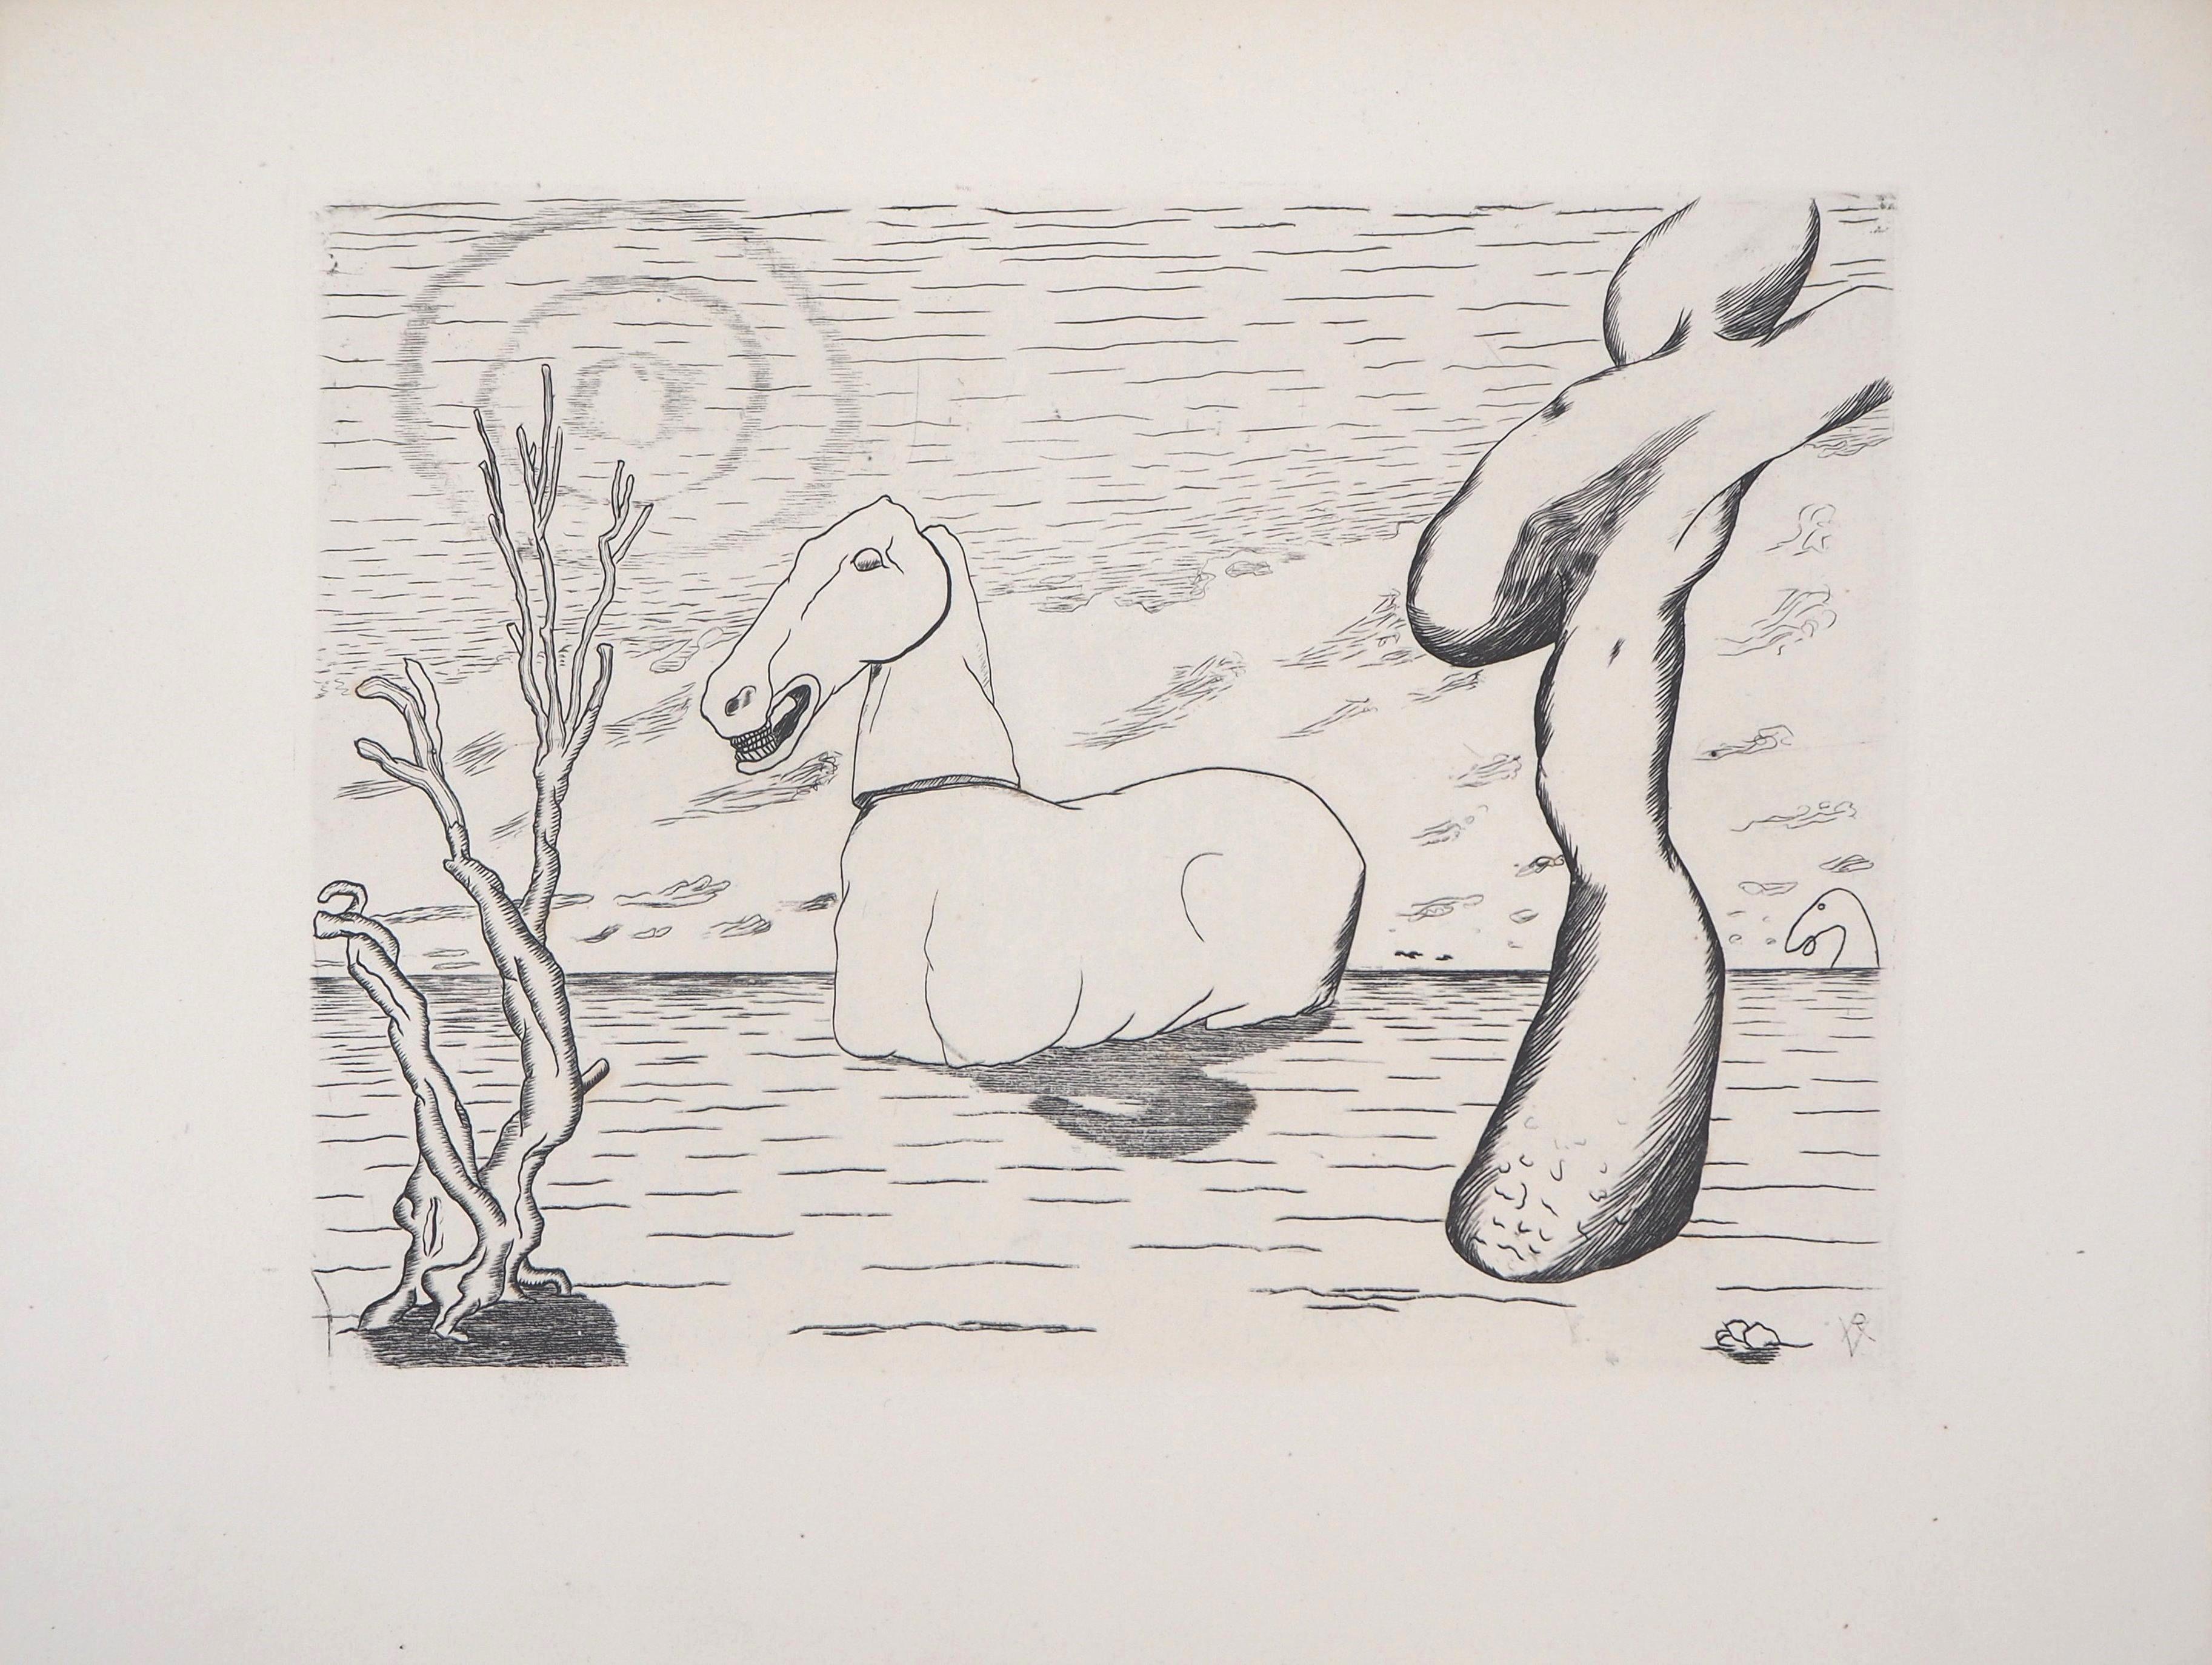 Roger Vieillard
Surrealist Horse, 1946

Original etching
Printed signature in the plate
On BFK Rives vellum, 25 x 32,5 cm (c. 9,8 x 12,7 inch)
Edition limited to 300 copies (unnumbered exemplars)

INFORMATION : This etching is a part of the set